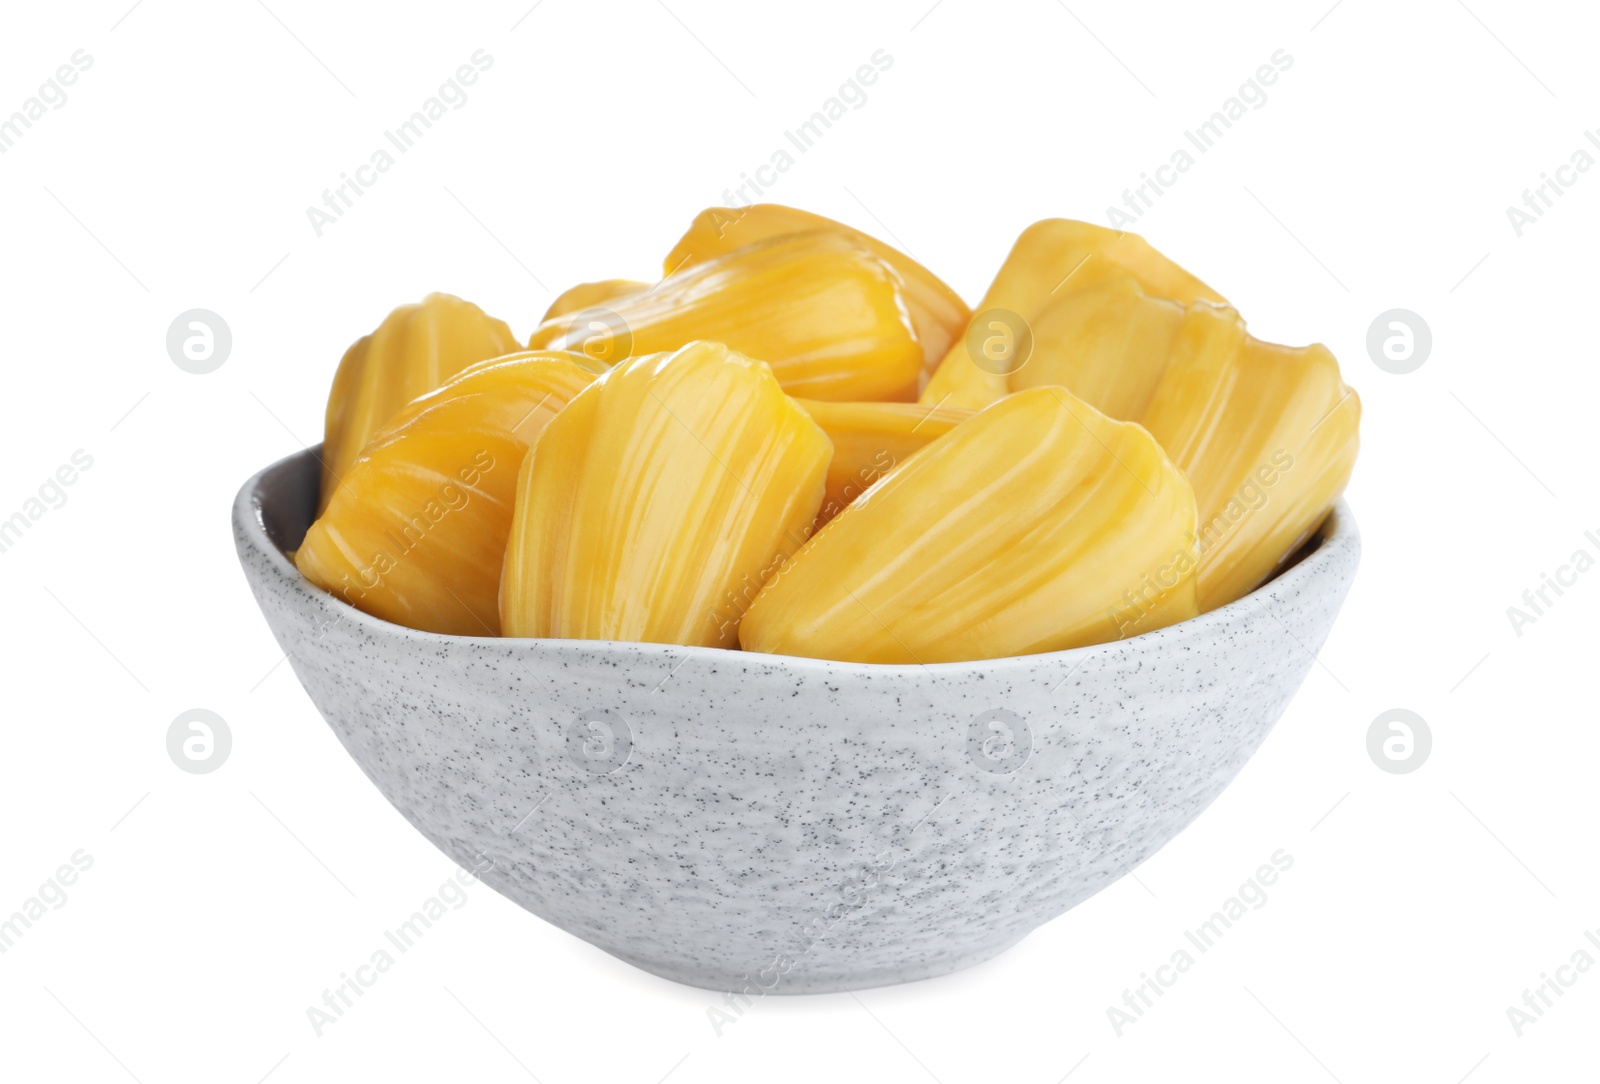 Photo of Delicious jackfruit bulbs in bowl on white background